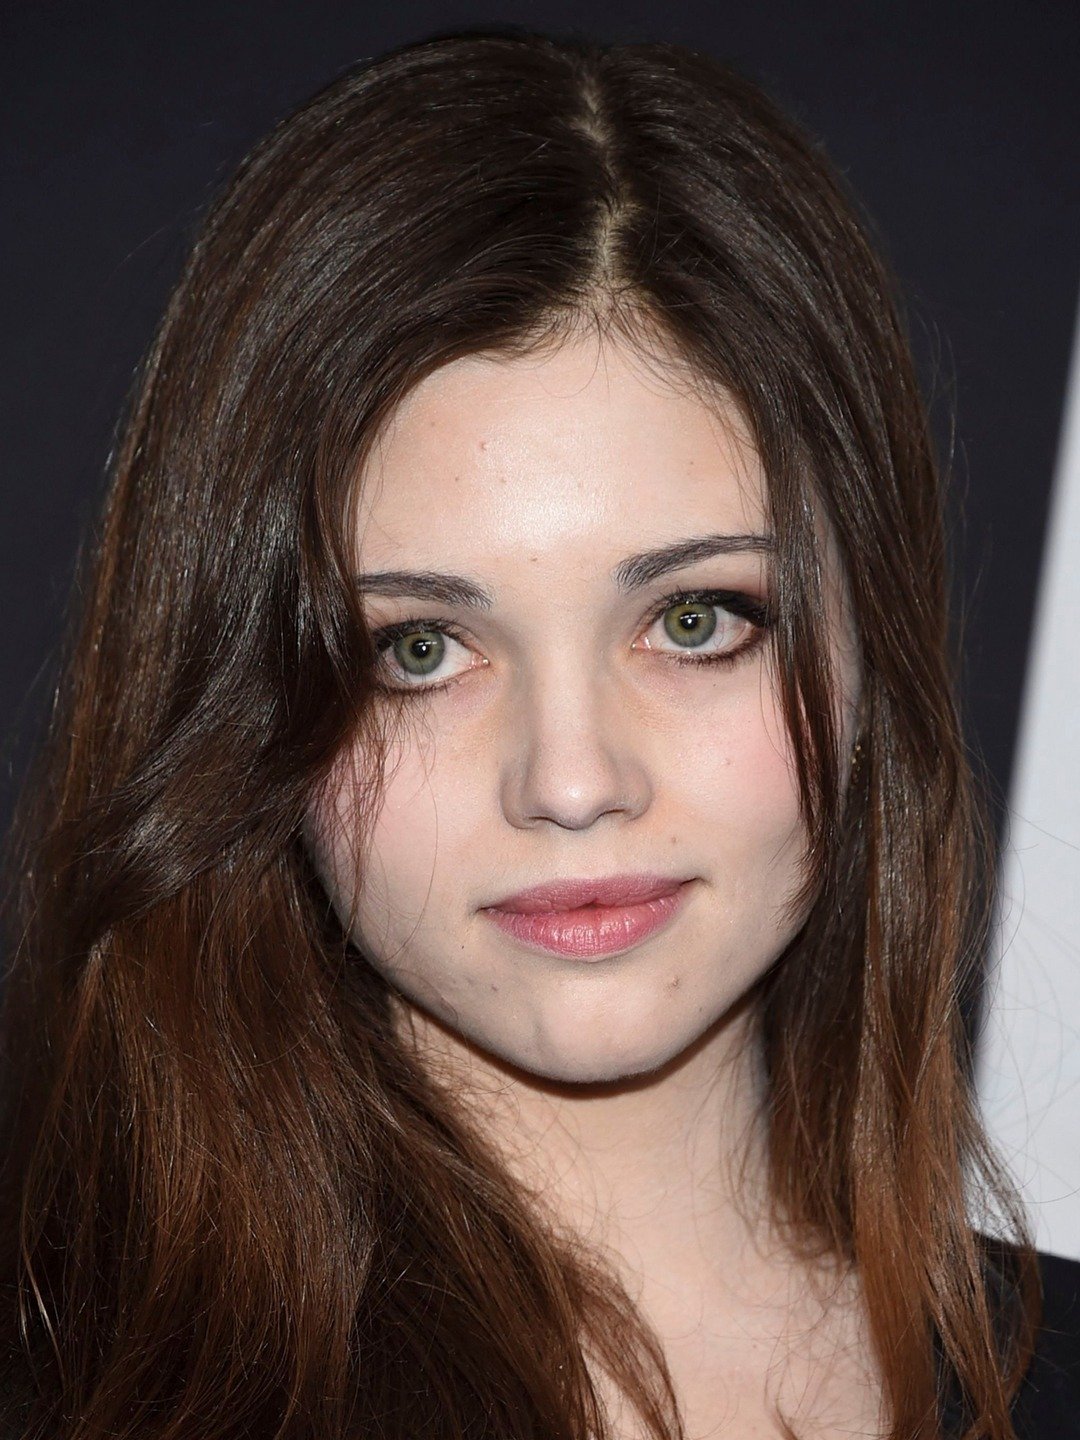 India eisley movies and tv shows